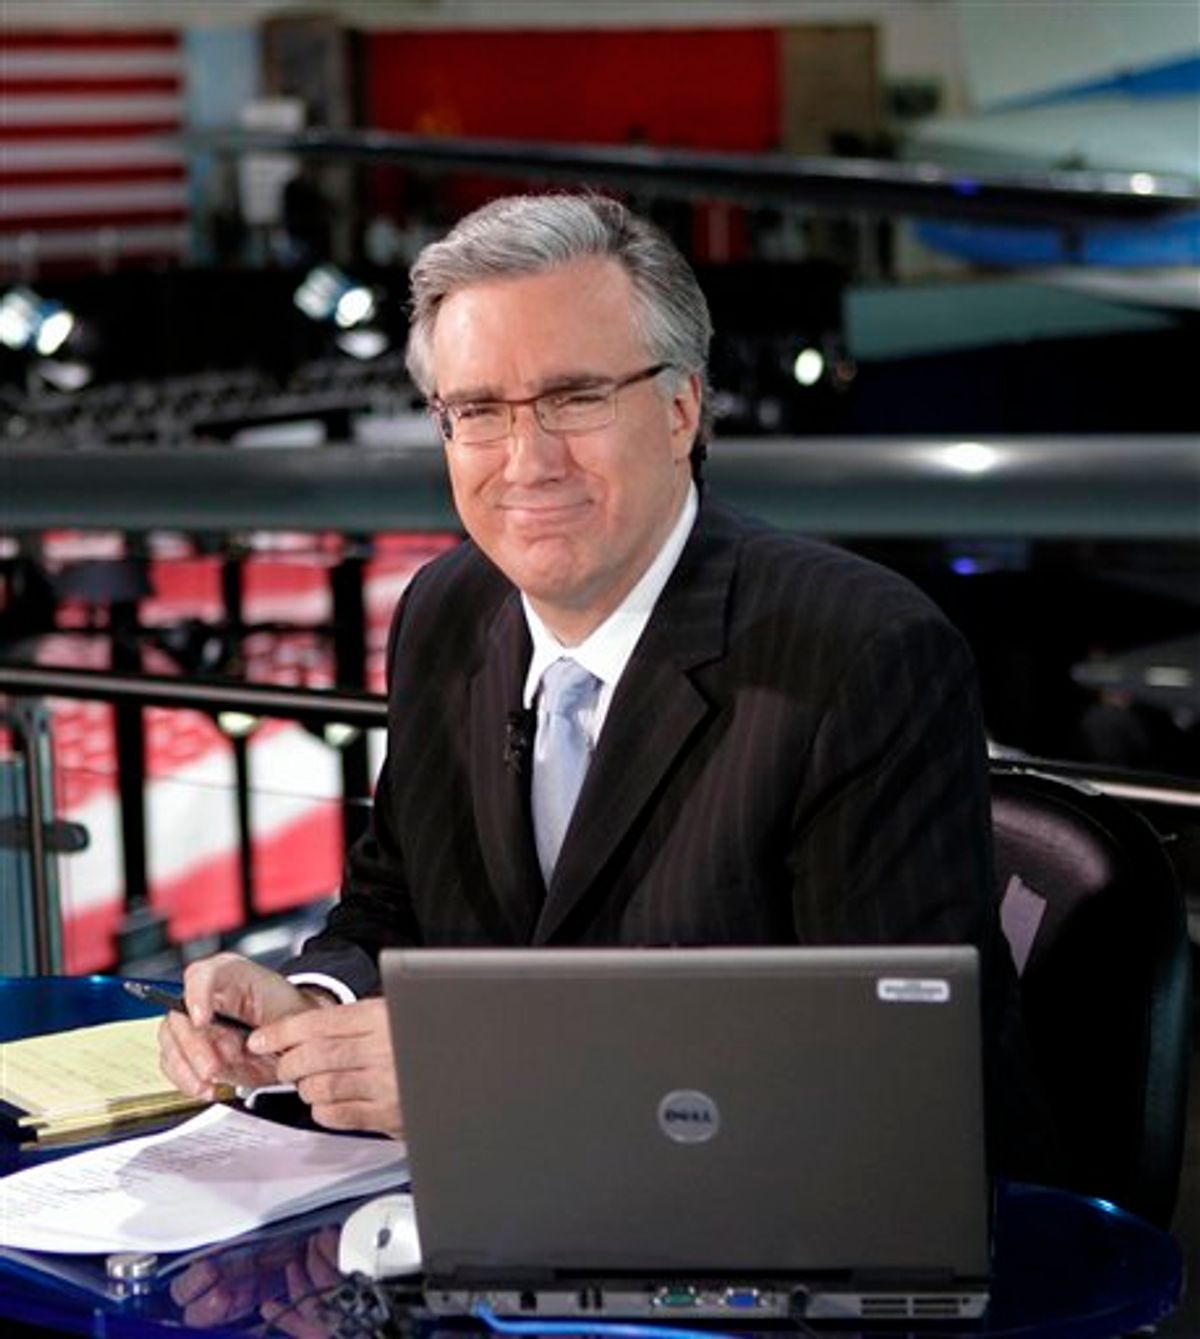 FILE - In this May 3, 2007 file photo, Keith Olbermann of MSNBC poses at the Ronald Reagan Library in Simi Valley, Calif. Keith Olbermann is leaving MSNBC and has announced that Friday's "Countdown" show will be his last.  MSNBC issued a statement Friday, Jan. 21, 2011, that it had ended its contract with the controversial host, with no further explanation. (AP Photo/Mark J. Terrill, File) (AP)